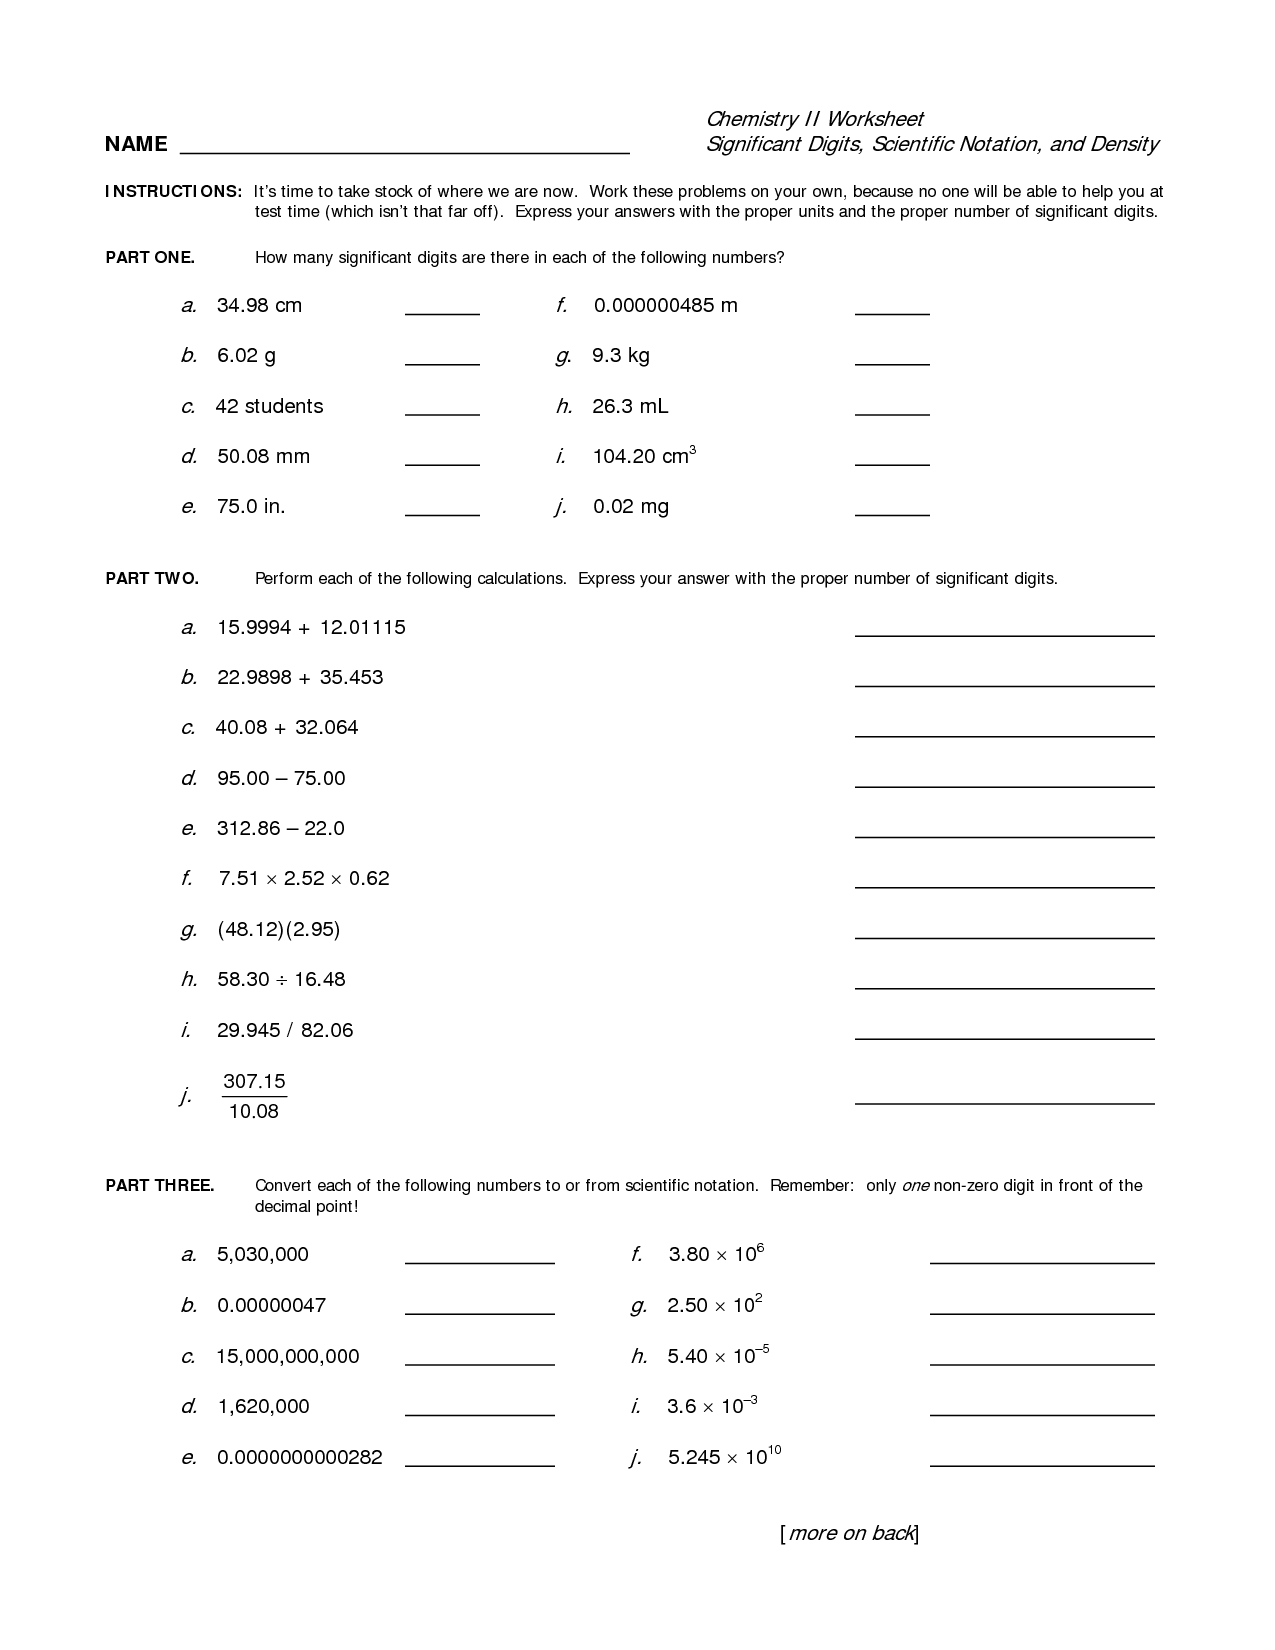 scientific-notation-and-significant-figures-worksheet-worksheet-list